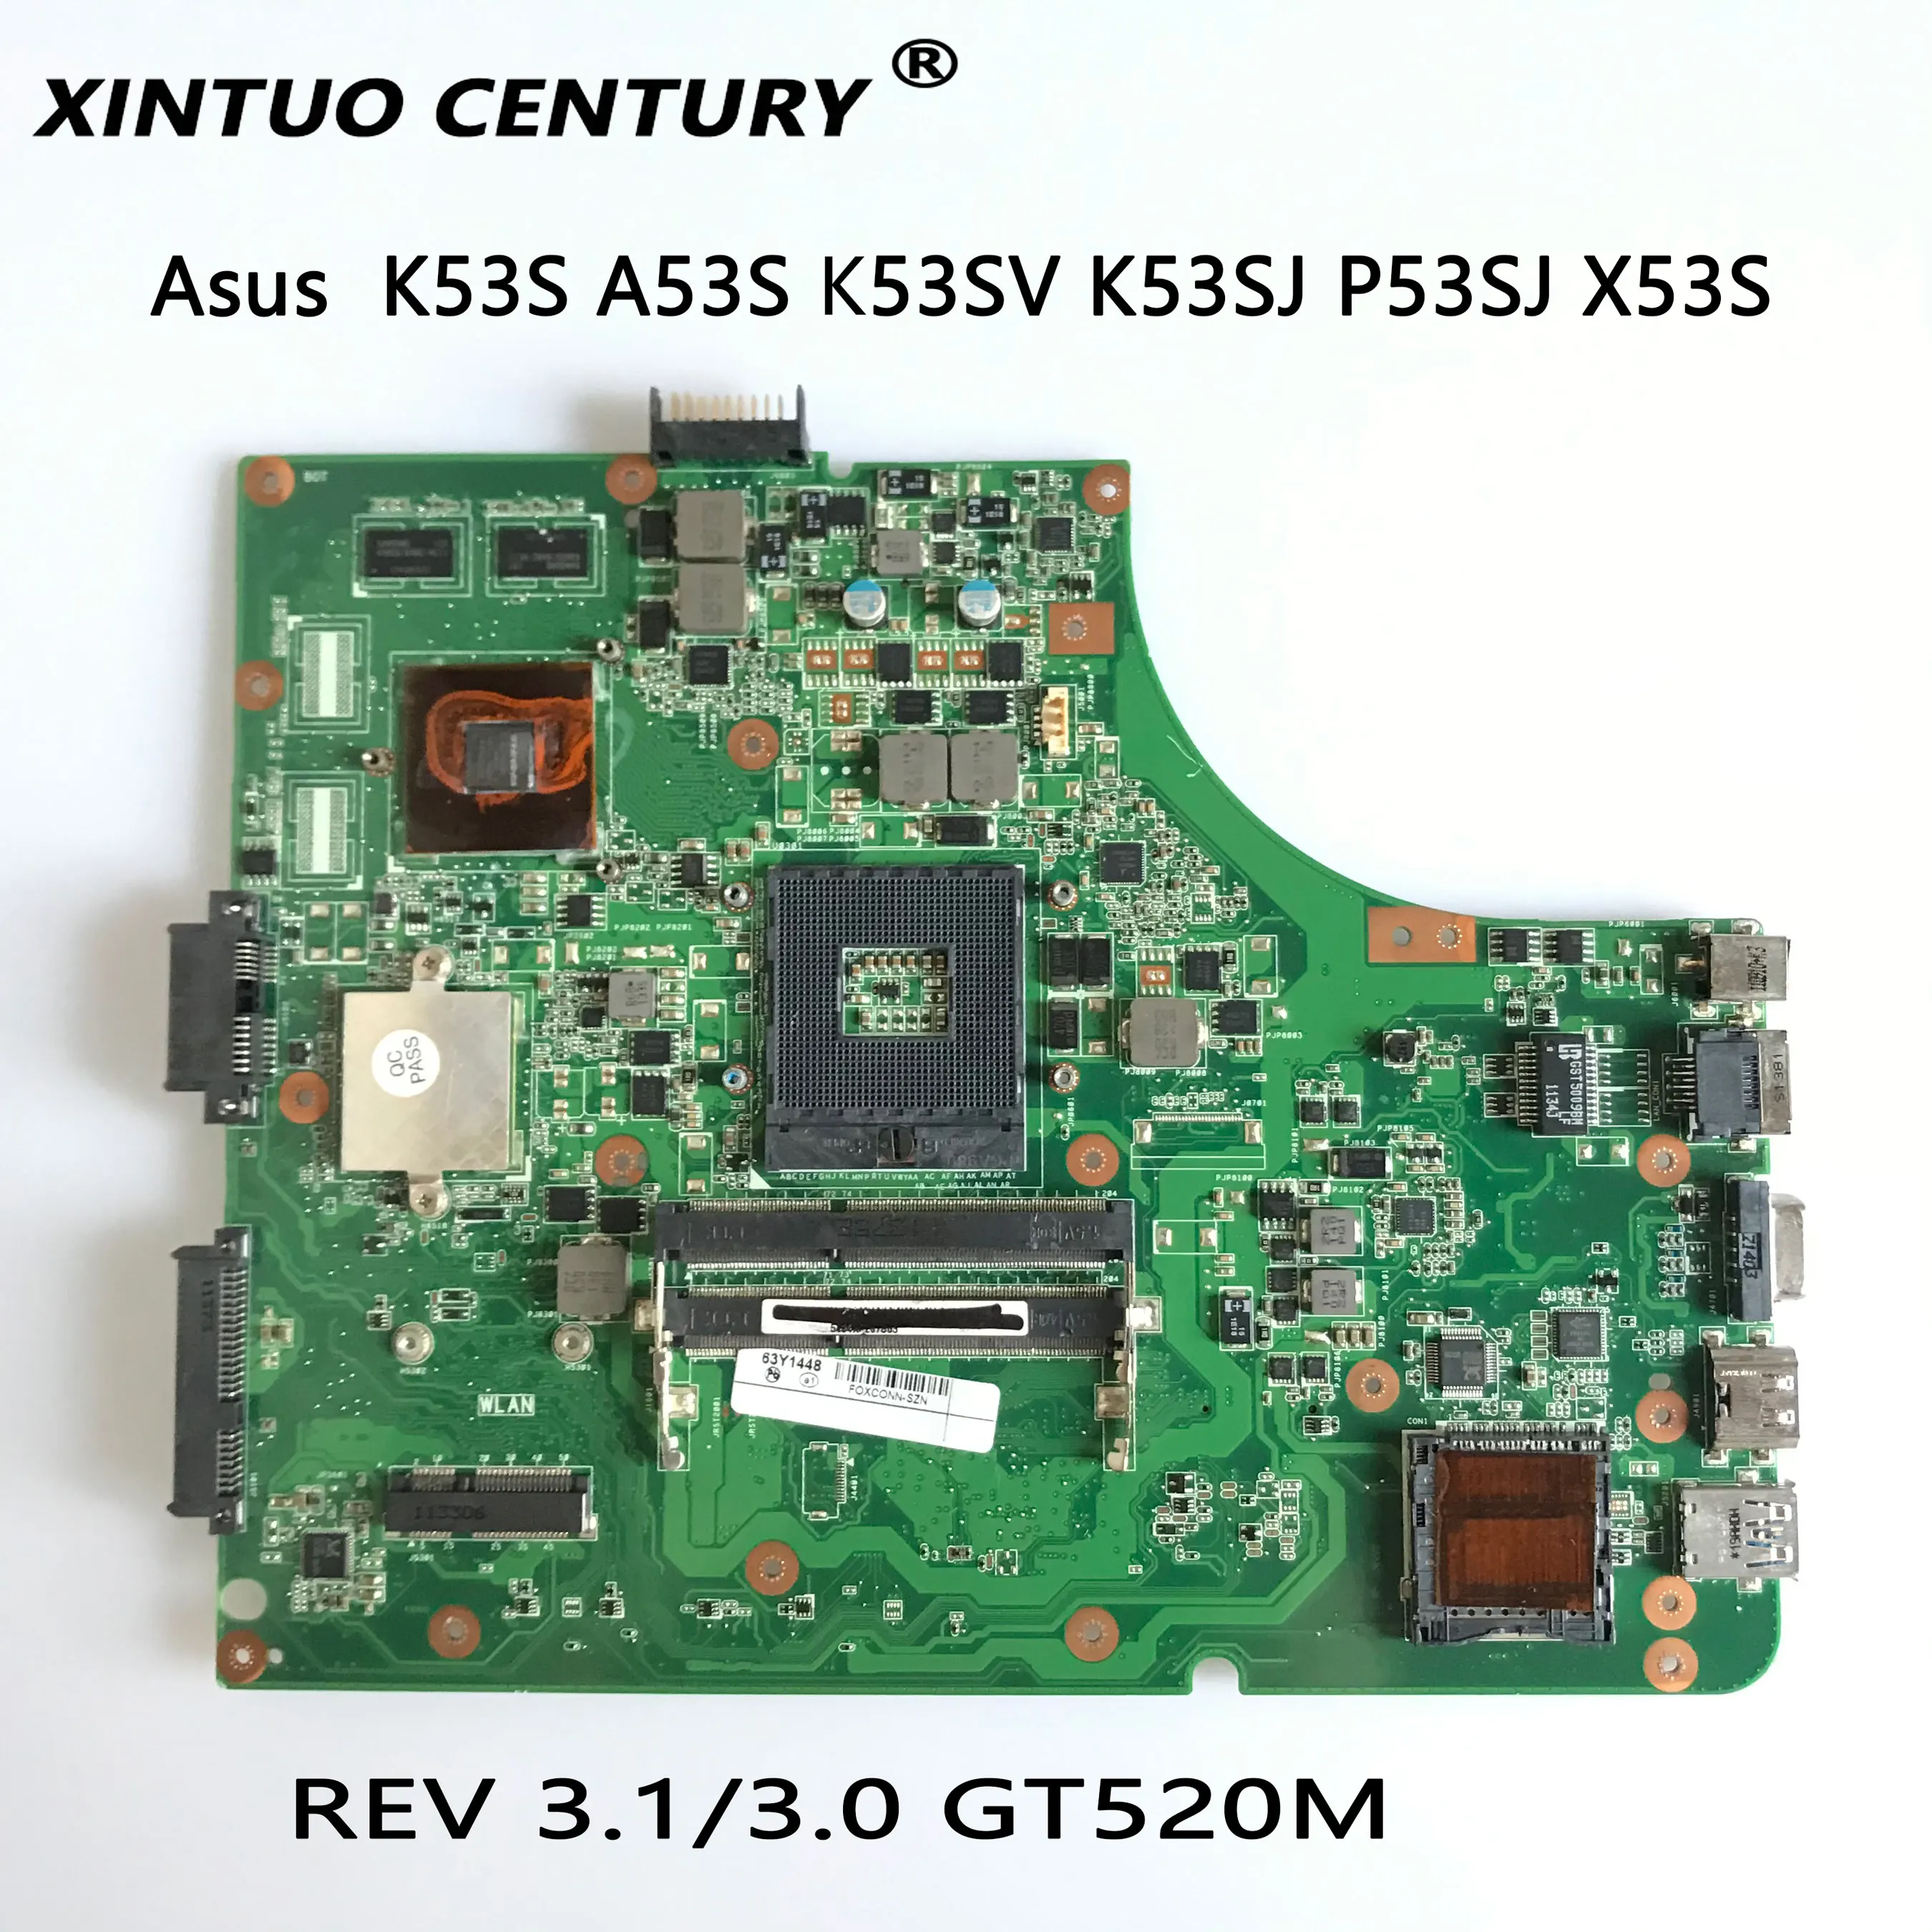 For ASUS K53S A53S K53SV K53SJ P53SJ X53S motherboard REV 3.1/3.0 GT520M K53SV laptop motherboard DDR3 motherboard 100% Tested